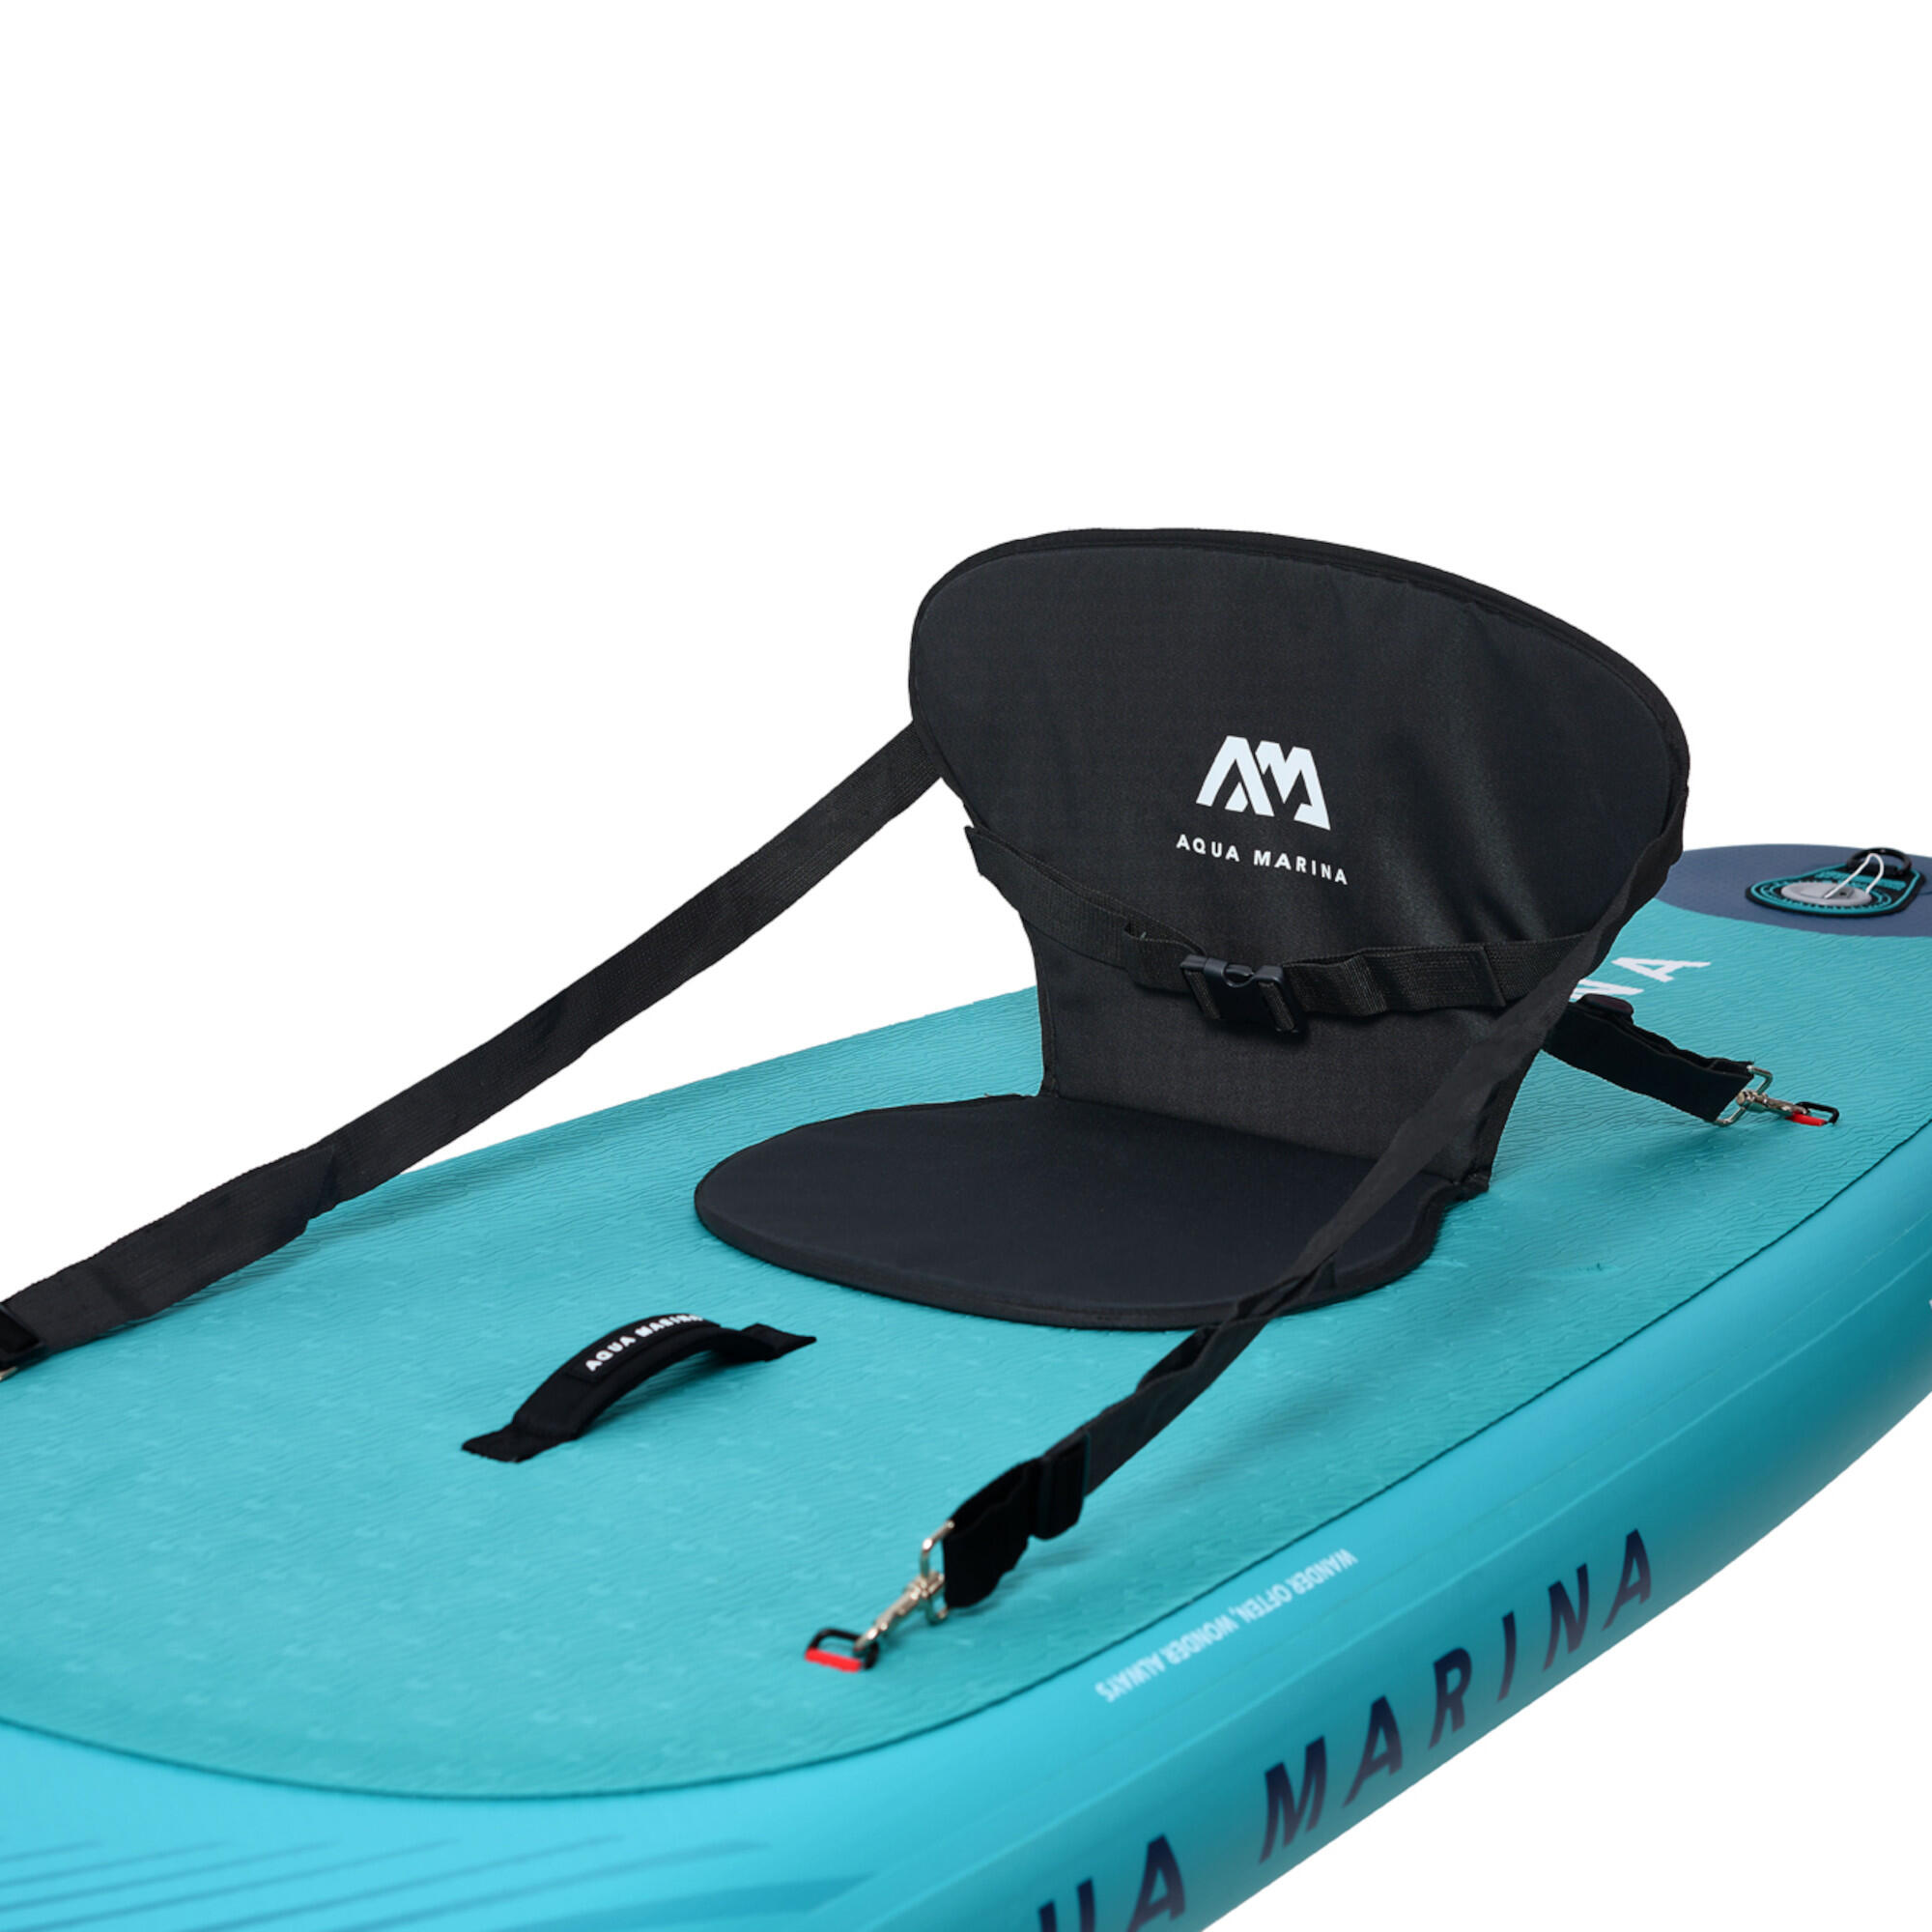 Aqua Marina Vapor stand-up paddle board package 10ft4/315cm 13/15